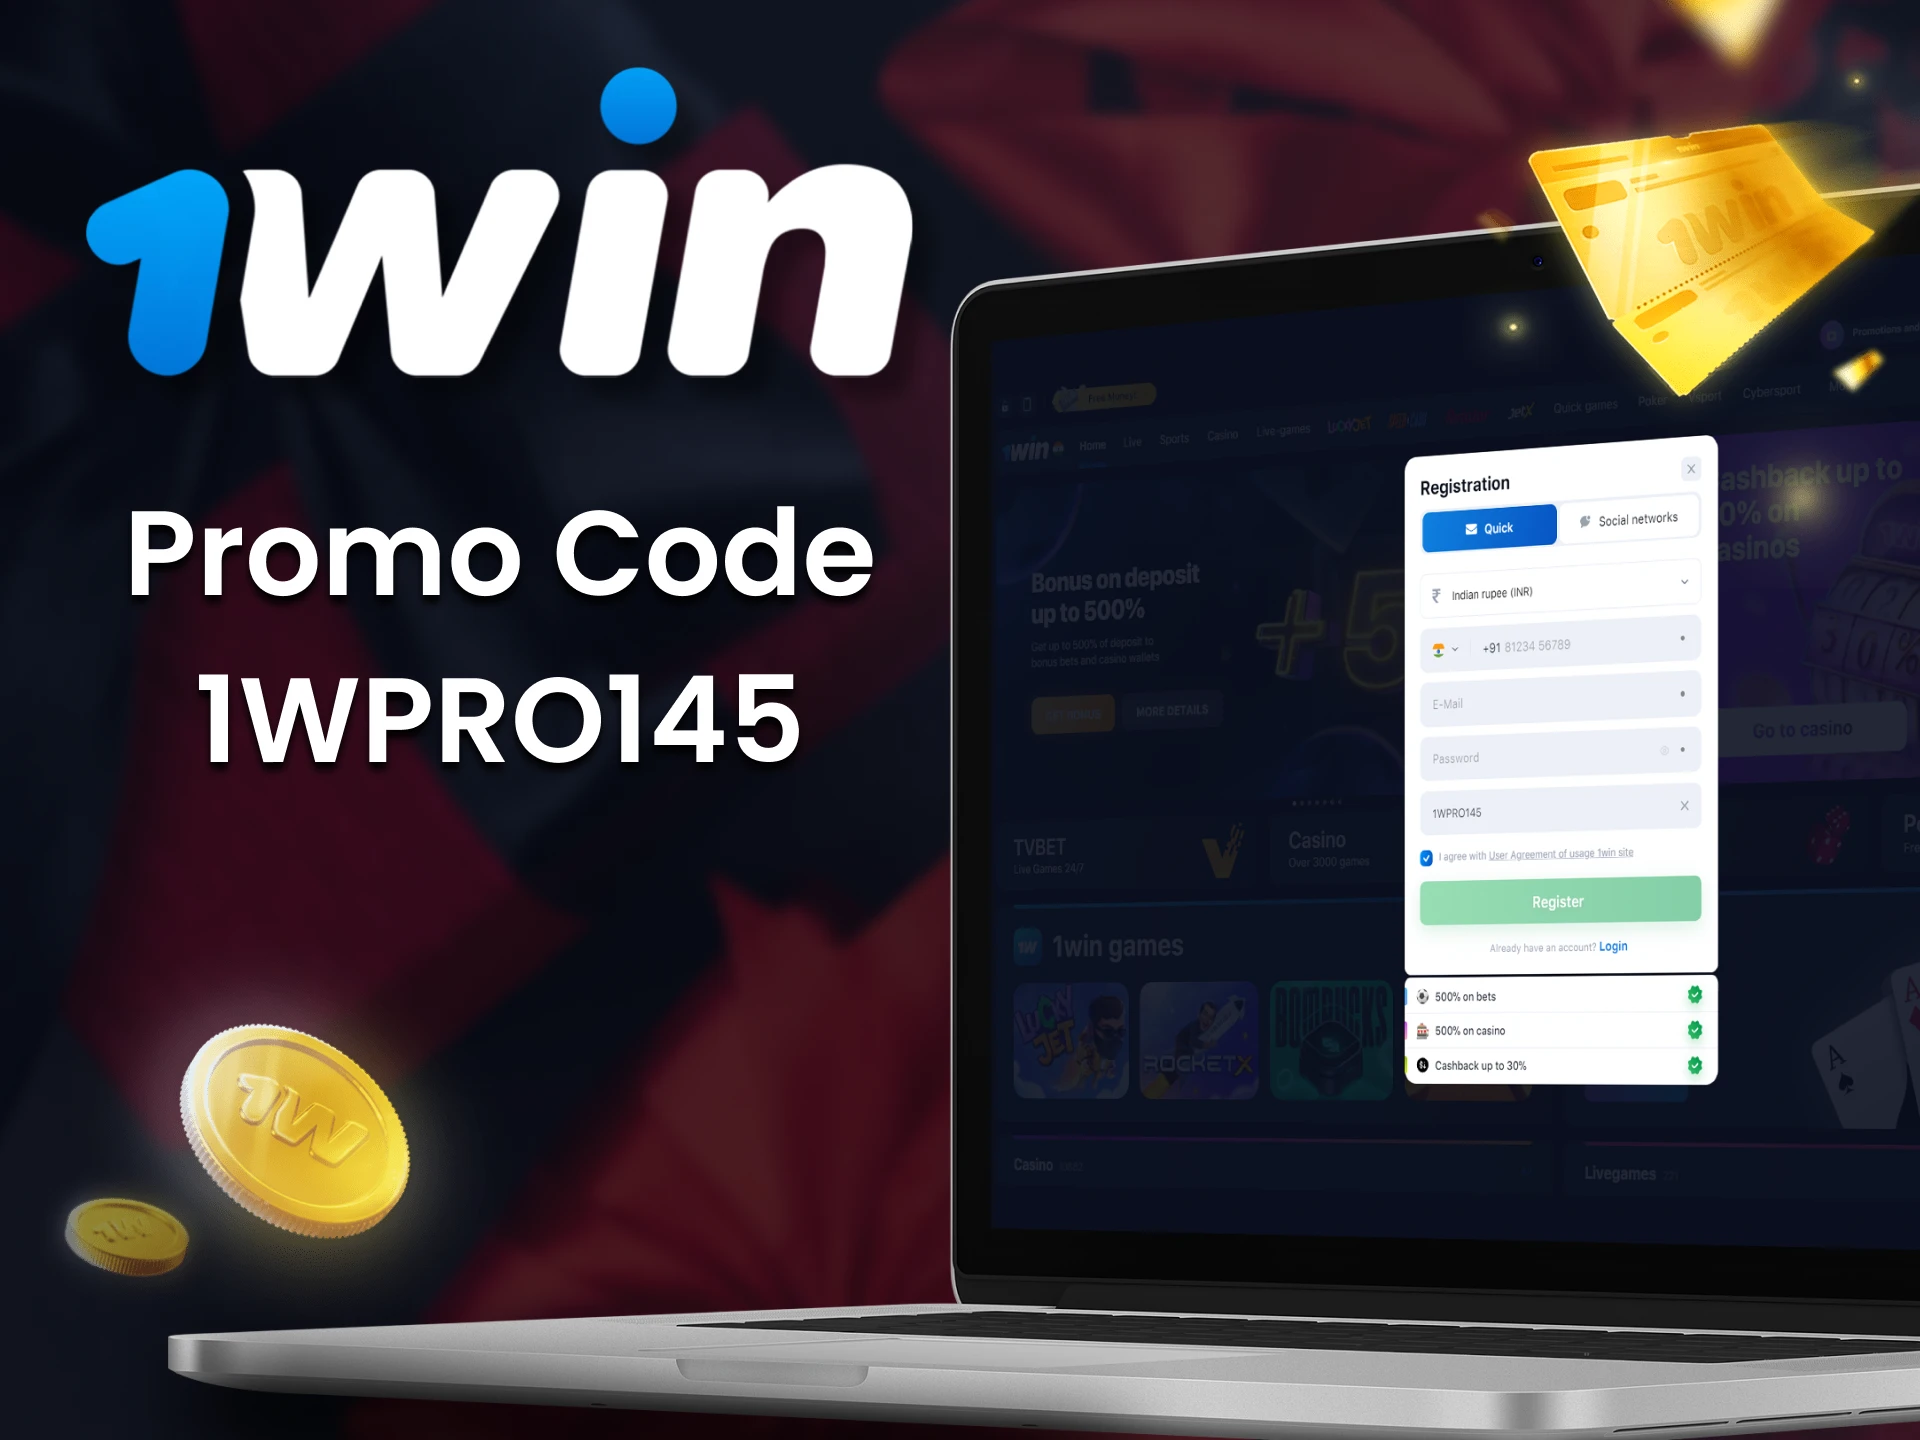 Use a 1win promo code 1WPRO145 to get additional bonuses.